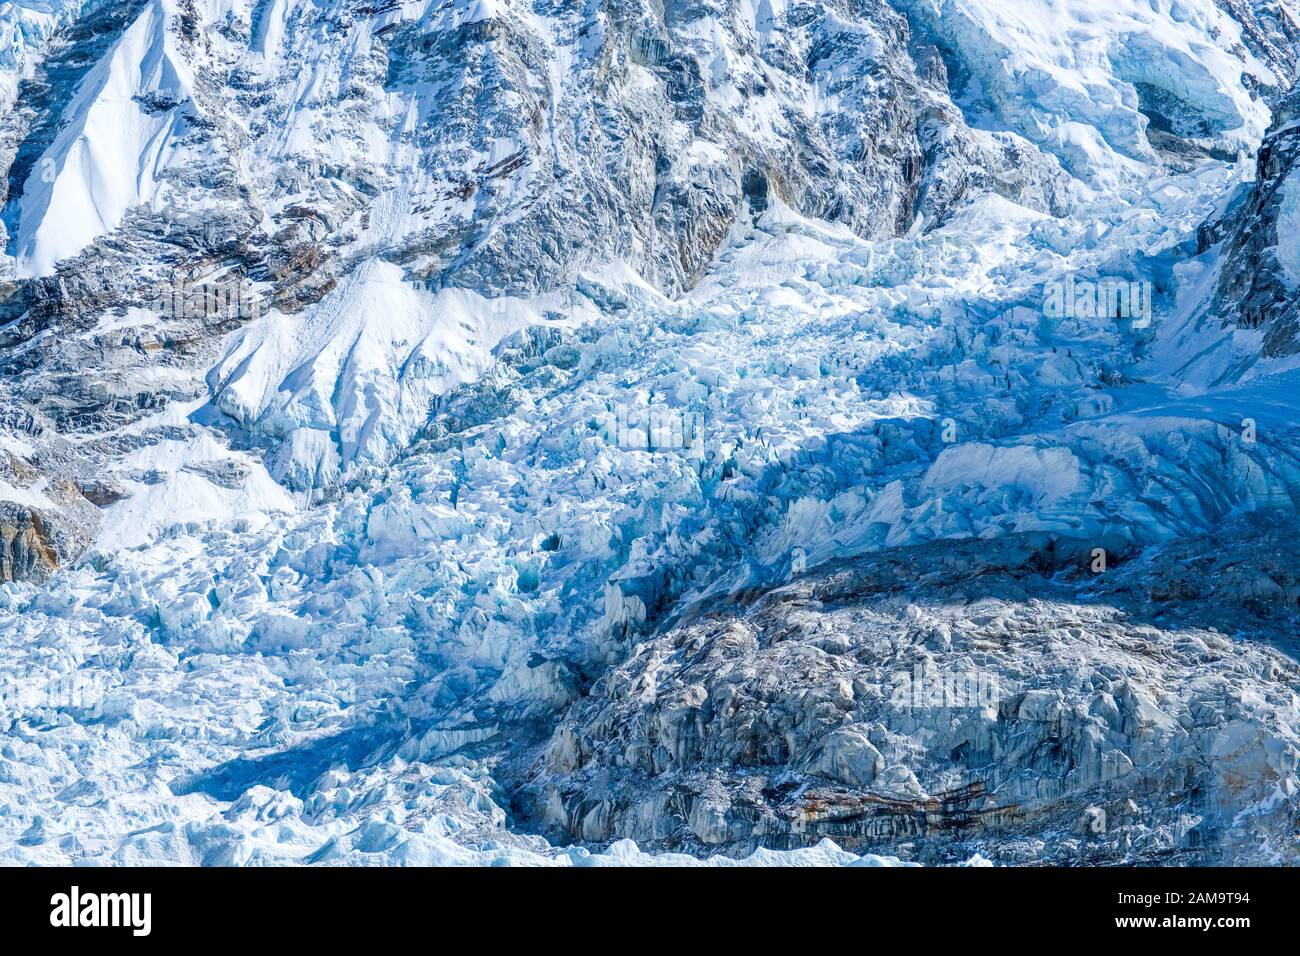 The Khumbu icefall and Glacier in the Nepal Himalayas, often visited as part of the Everest Base Camp Trek Stock Photo